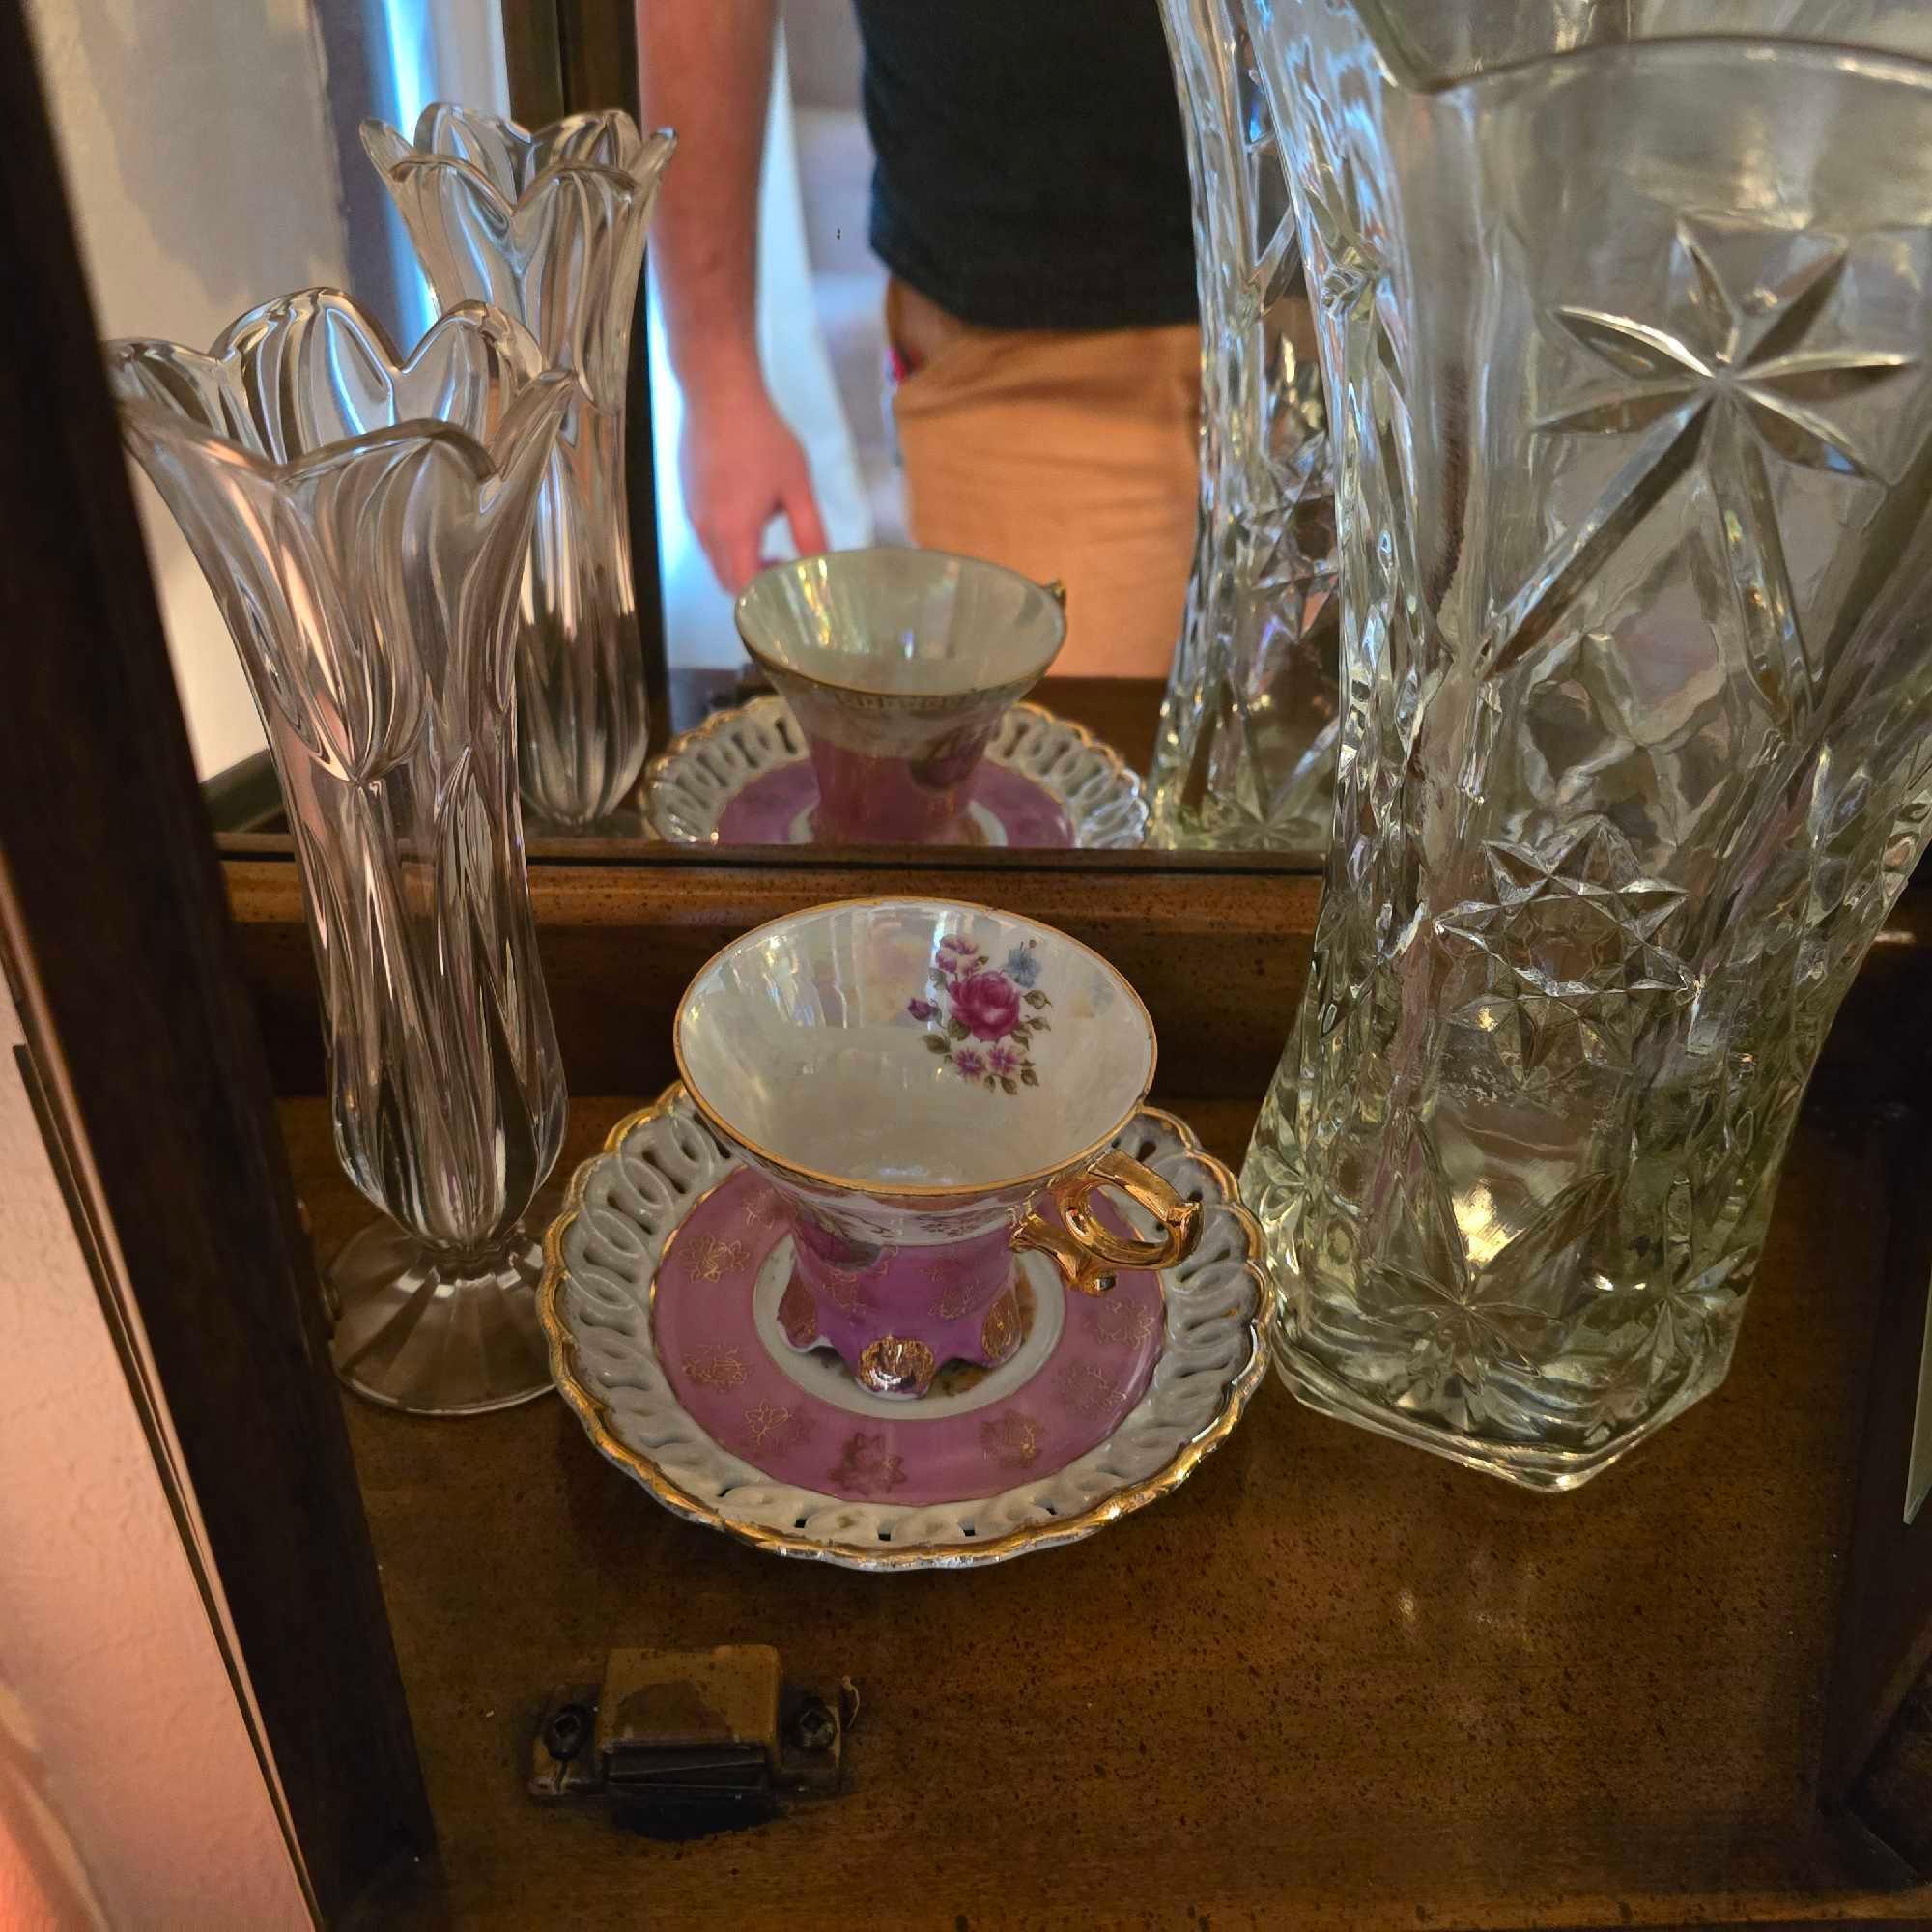 Contents of Curio Cabinet - Cut Pattern Glass, China Pieces, & Cranberry Glass Pieces